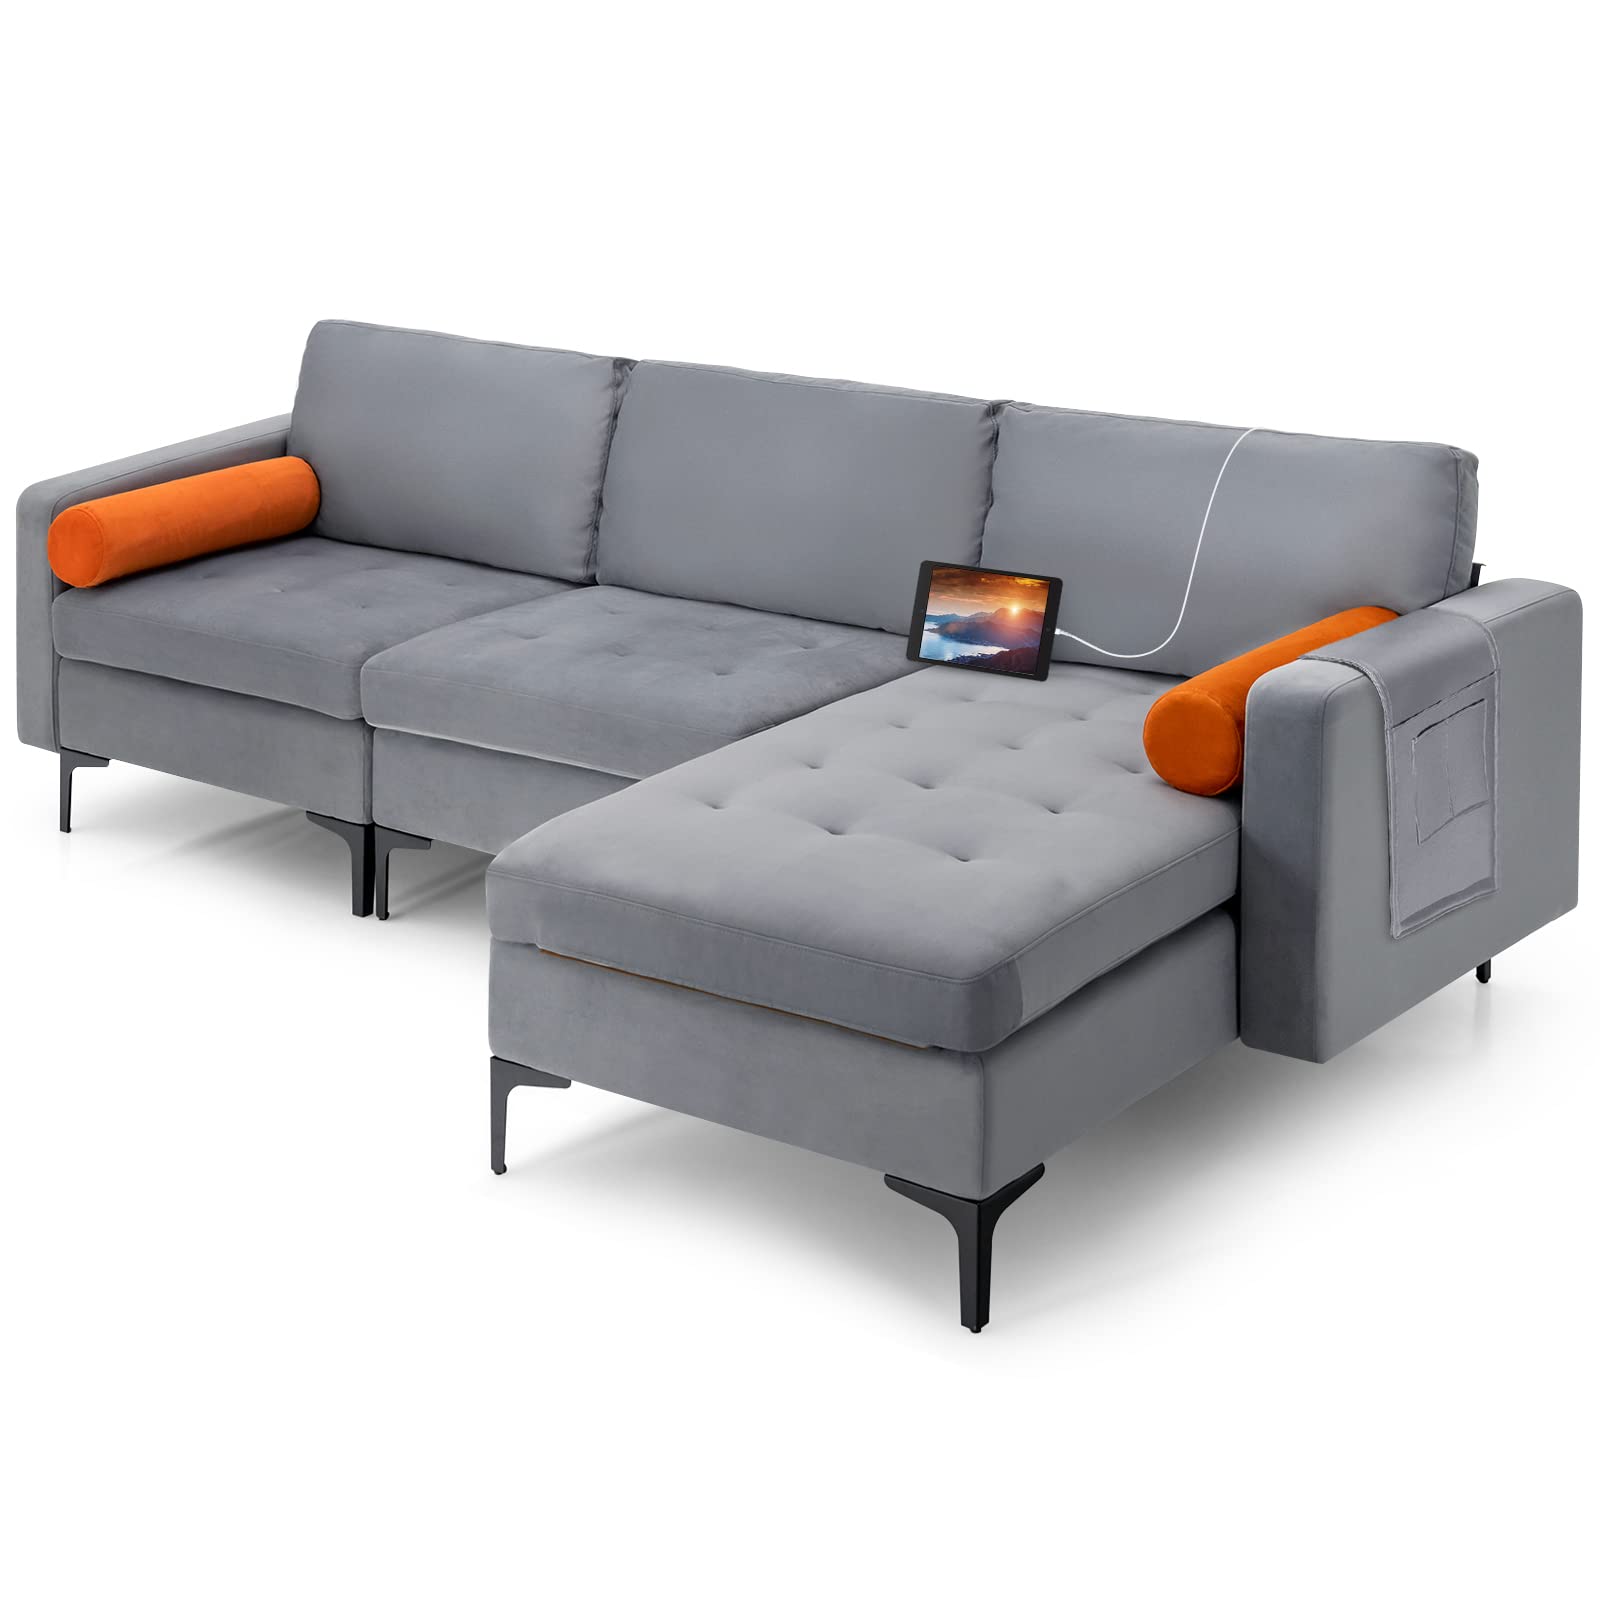 Giantex 97" Large Couch, 3 Seat Sectional Sofa Set, L-Shaped Modular Sleeper with Chaise Lounge & USB Port & Socket